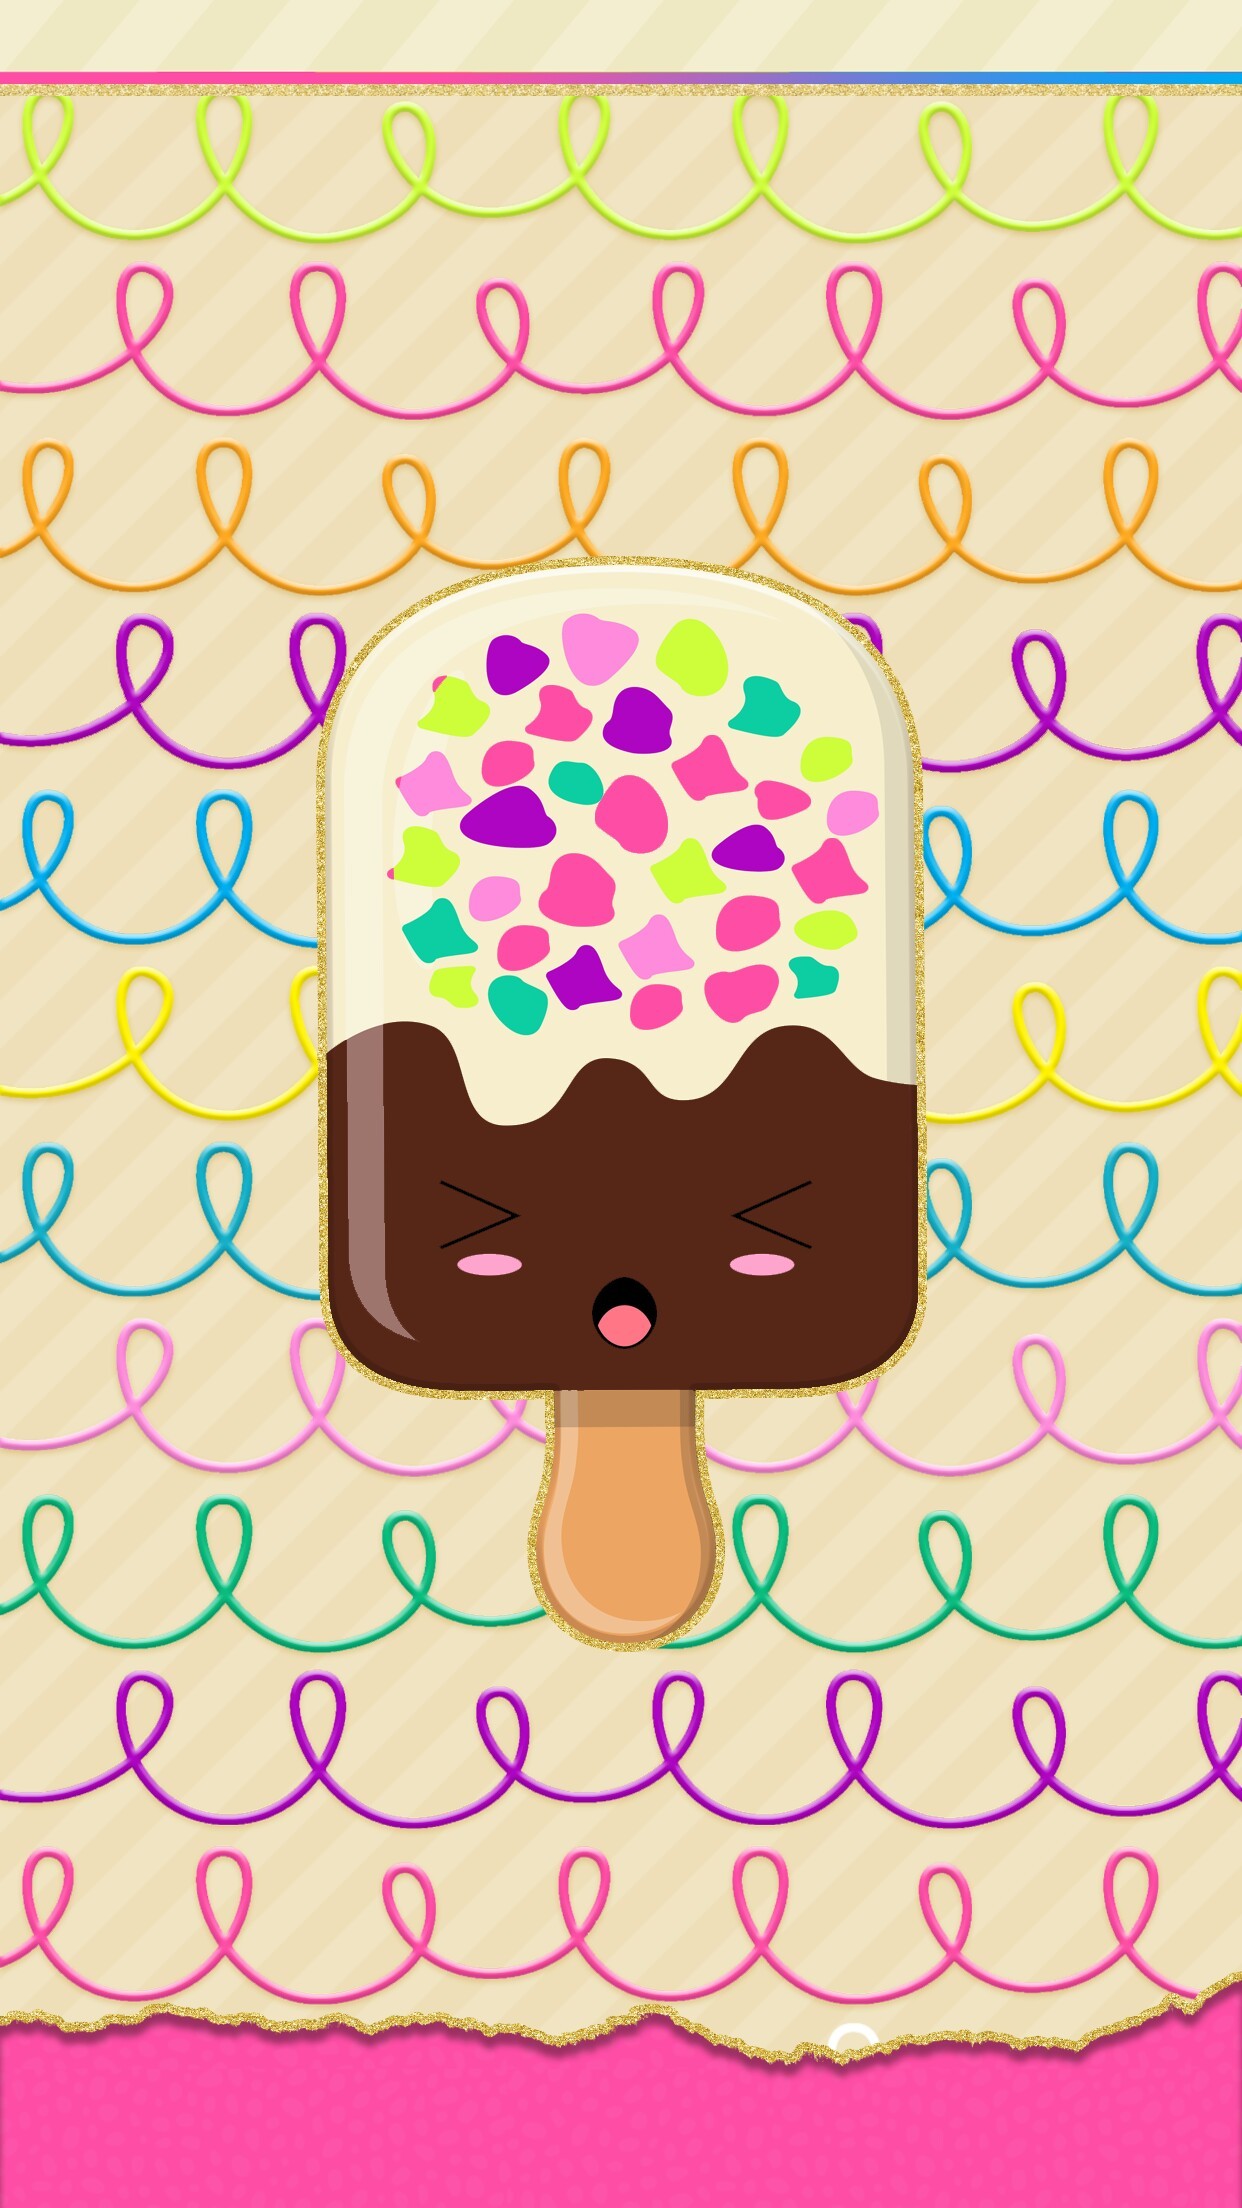 1242x2208 Cute Wallpapers, Iphone Wallpapers, Rainbow Wallpaper, Iphone 3, Candy  Land, Icecream, Popsicles, Kawaii, Smartphone